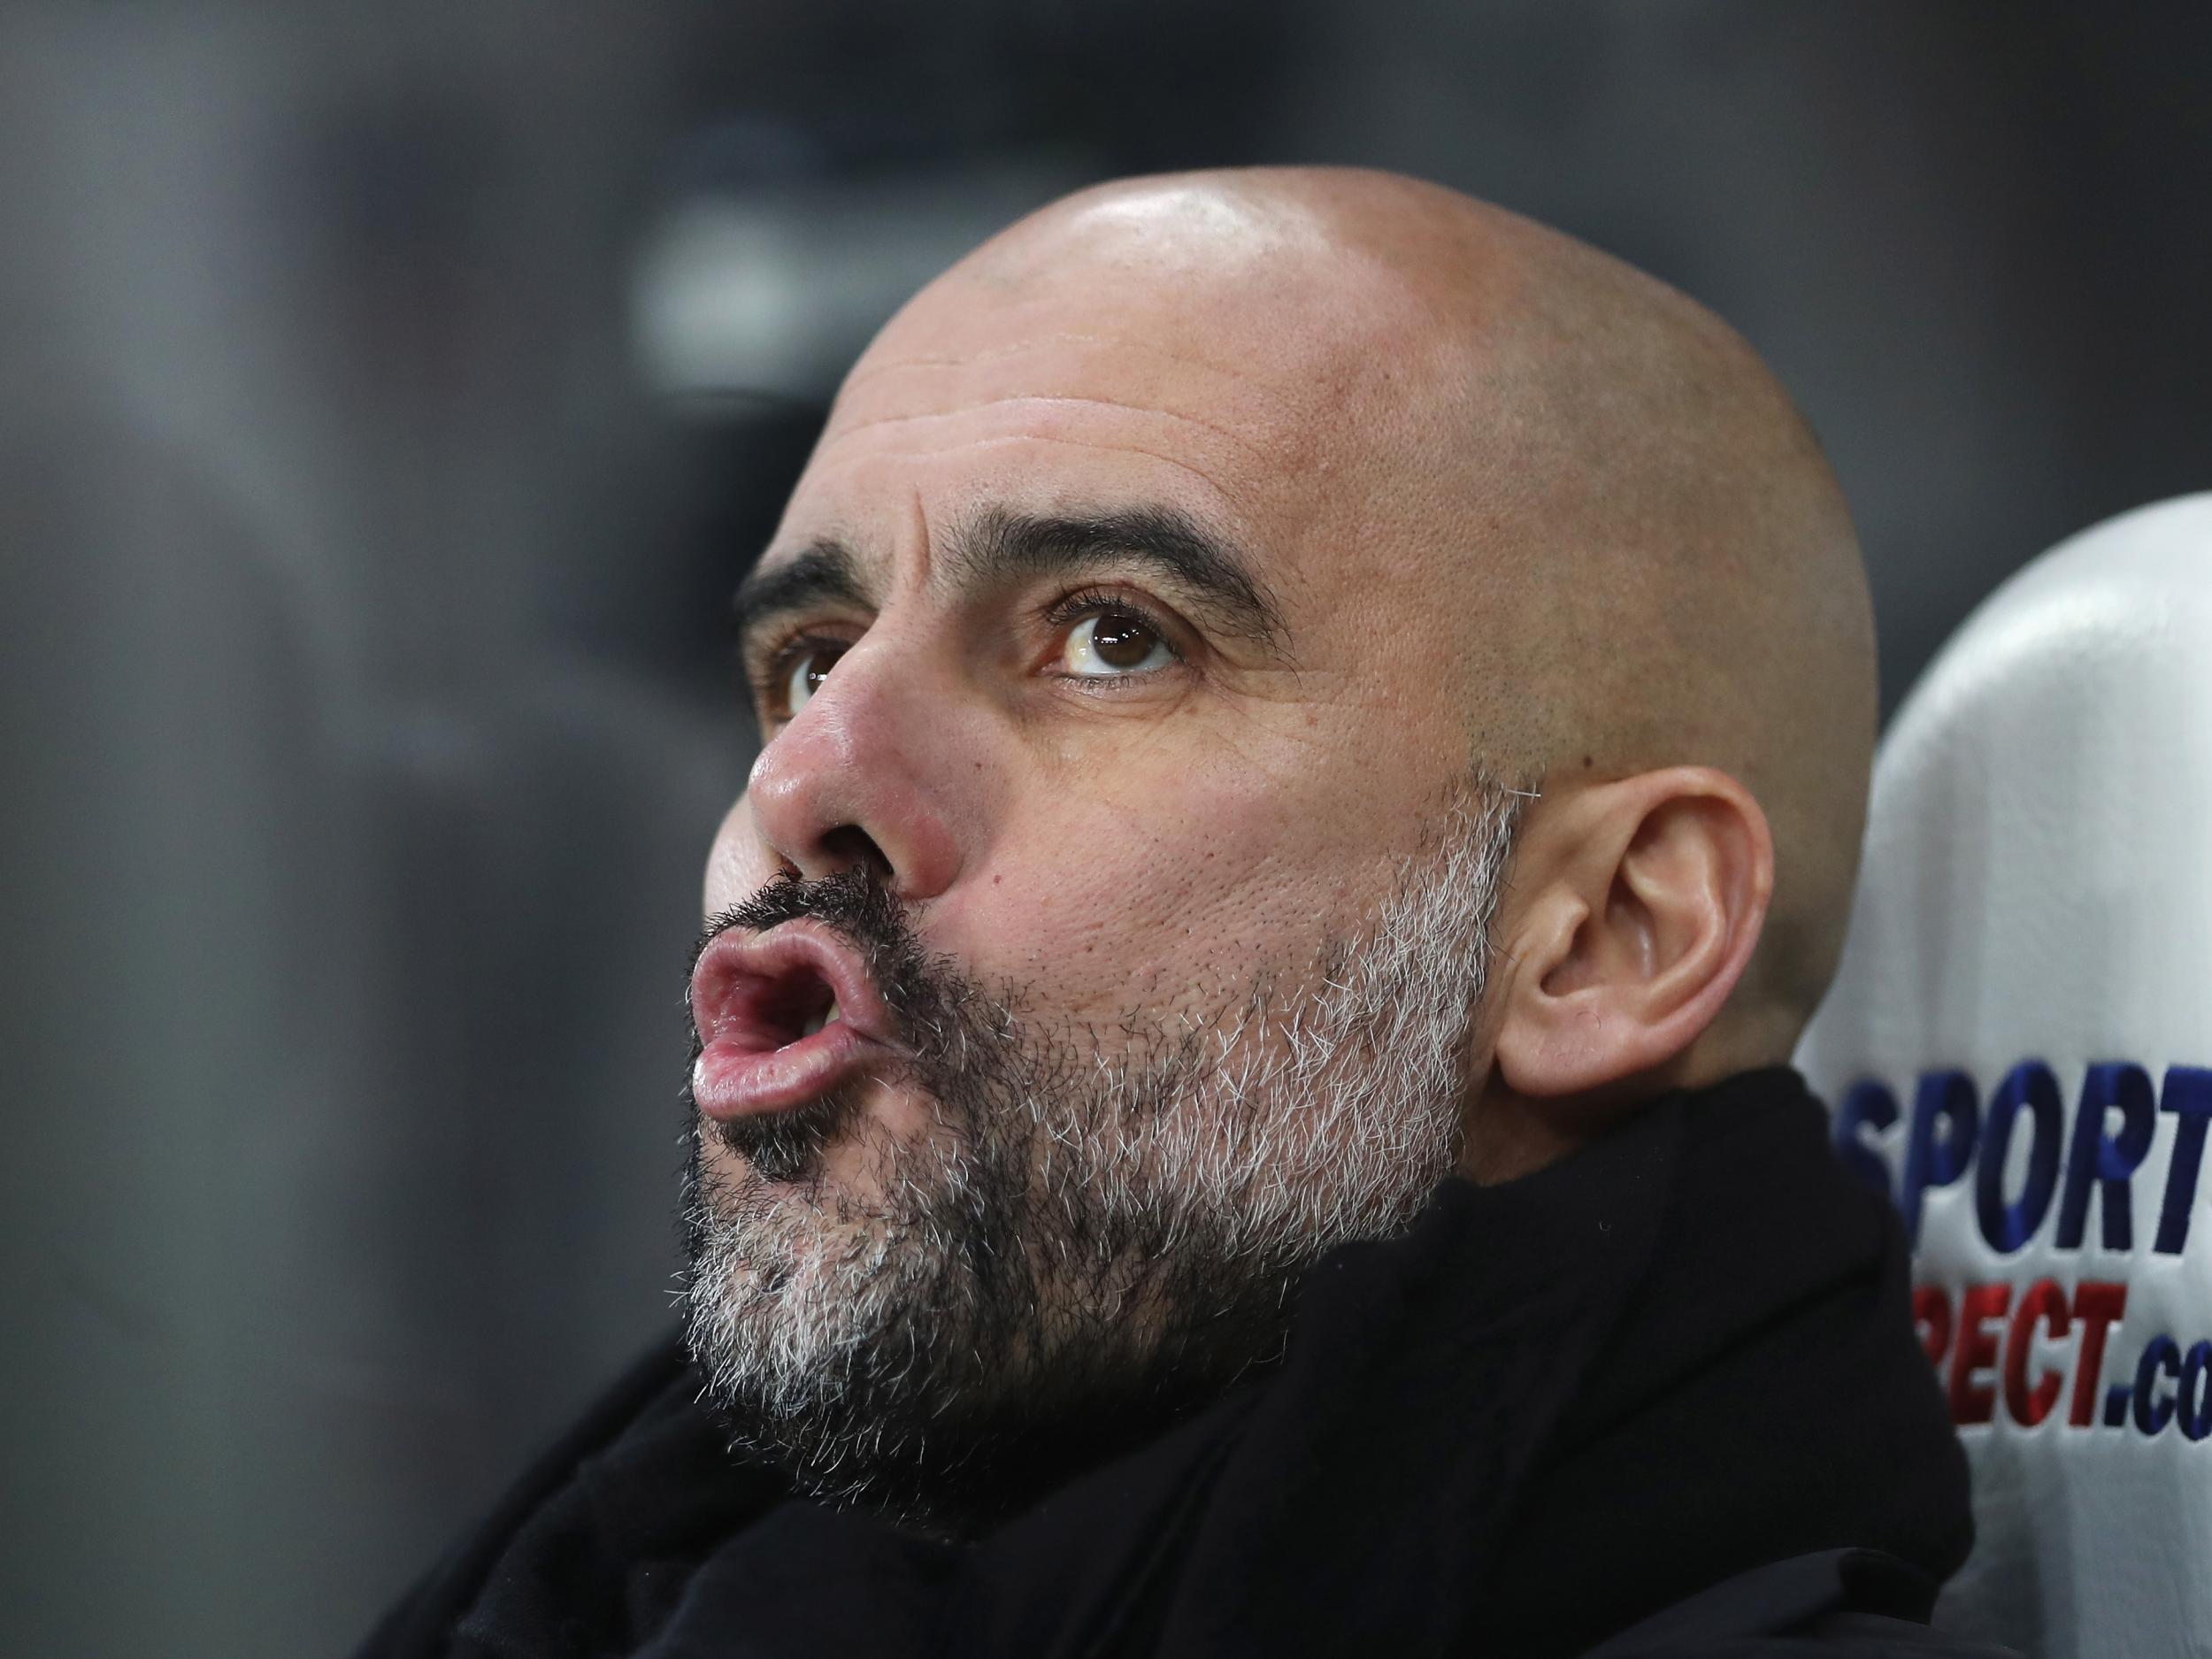 Guardiola is only one victory short of his consecutive win record with Bayern Munich